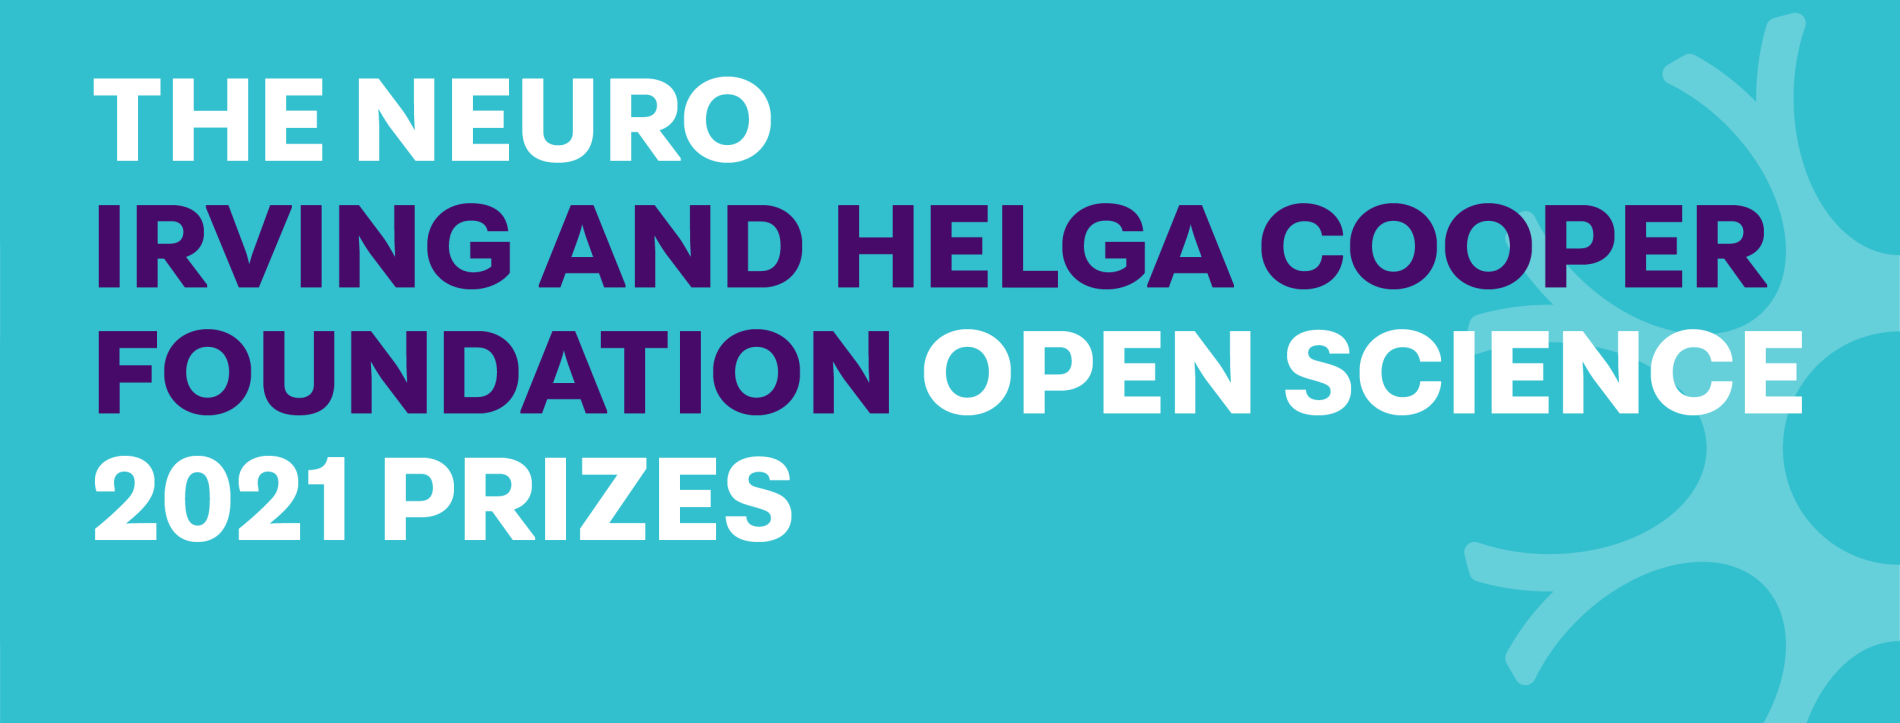 The Neuro – Irving and Helga Cooper Foundation Open Science Prizes